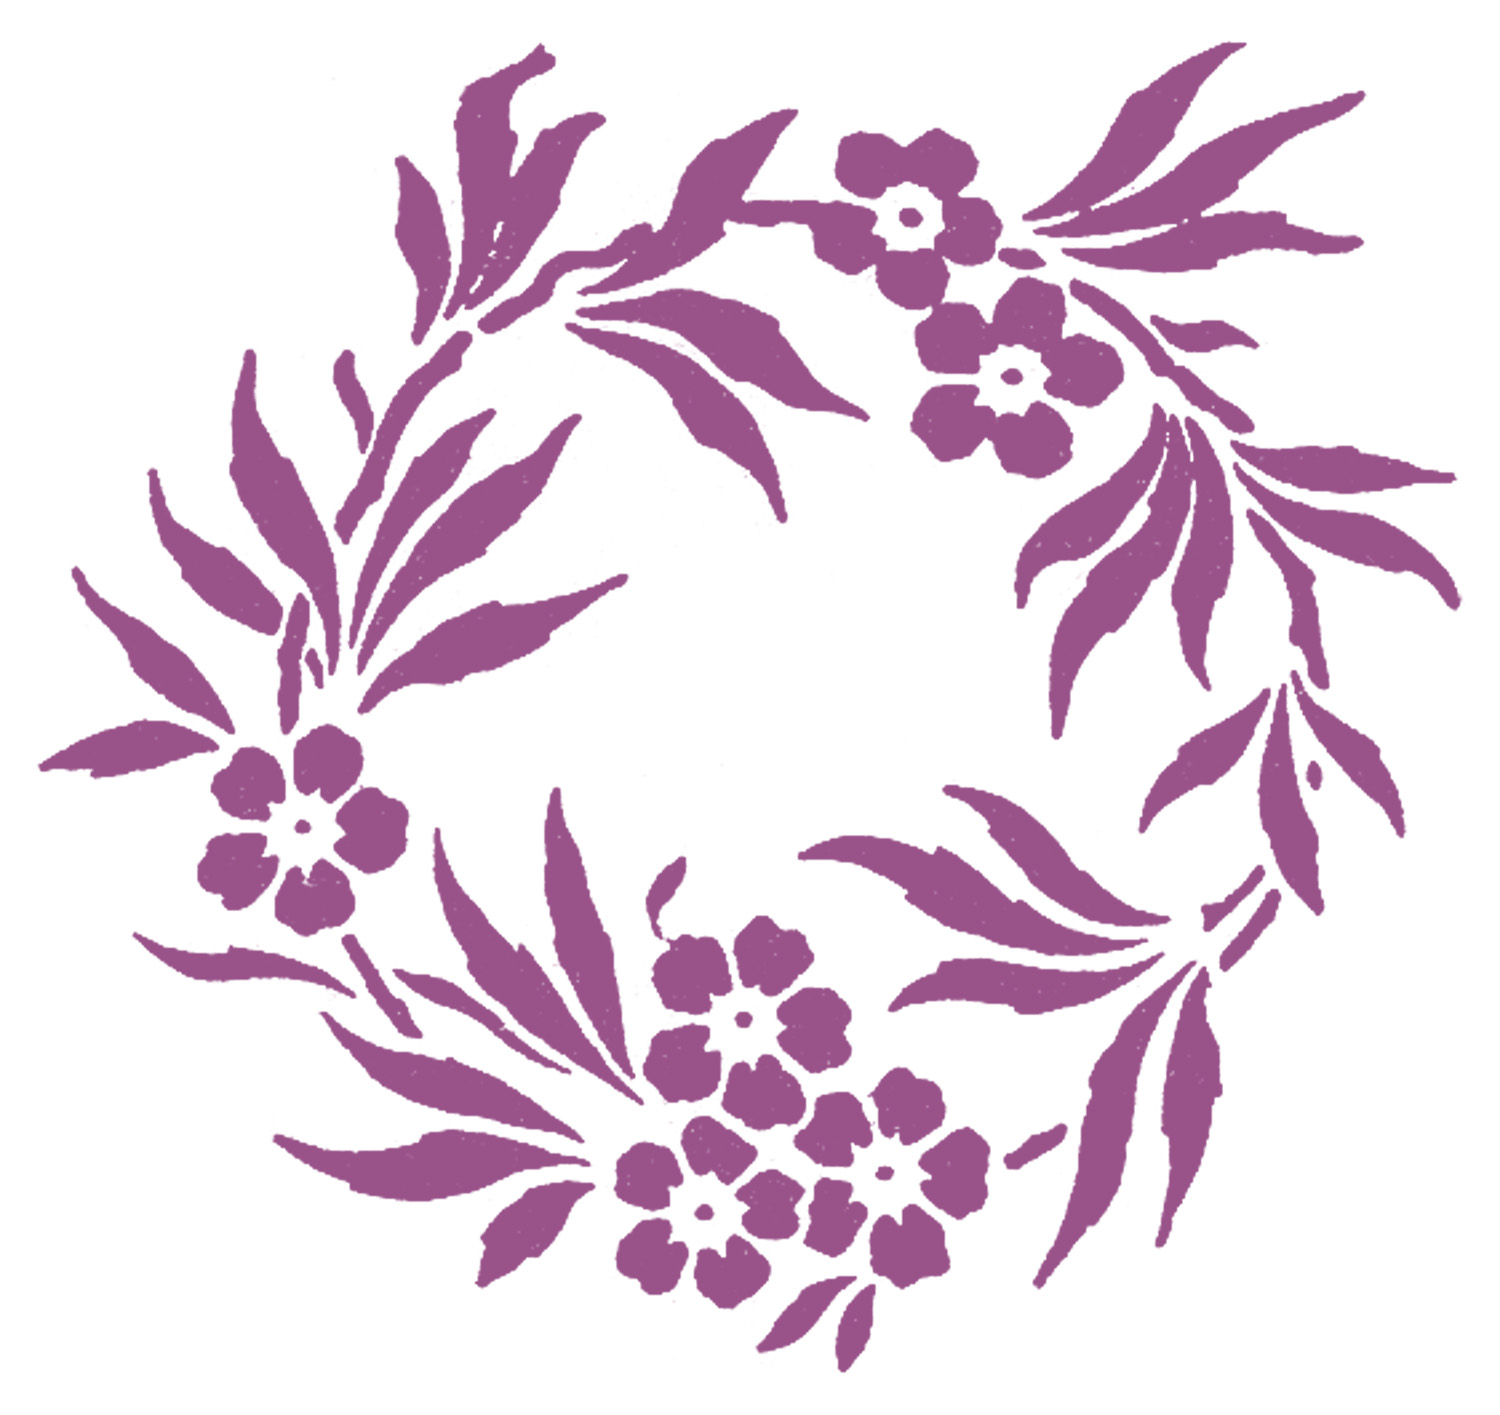 Stock Images - Pretty Floral Wreaths - Frames - The Graphics Fairy